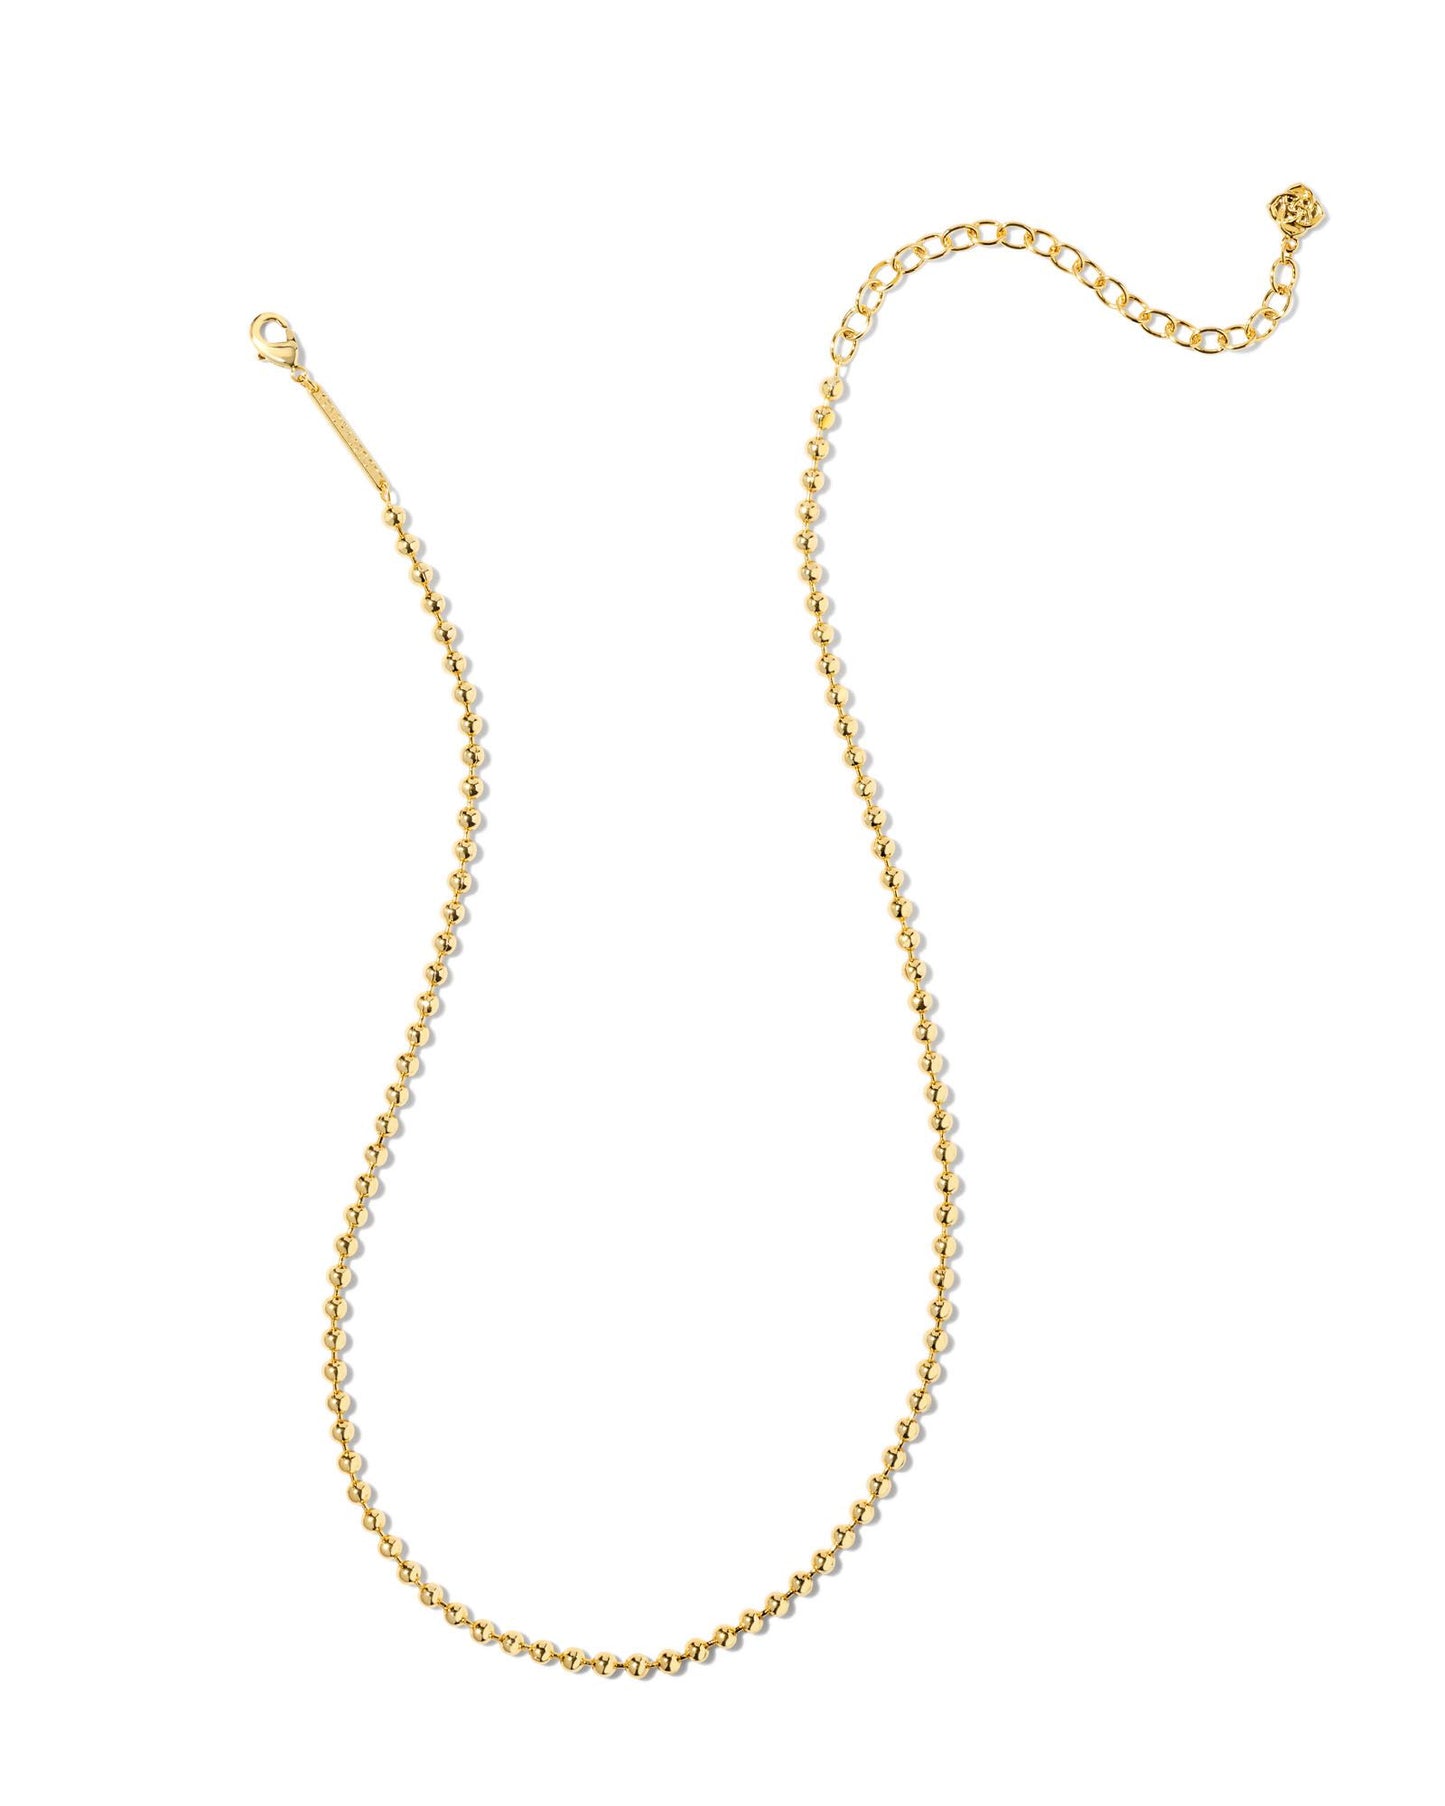 Kendra Scott Oliver Chain Necklace (gold or silver)